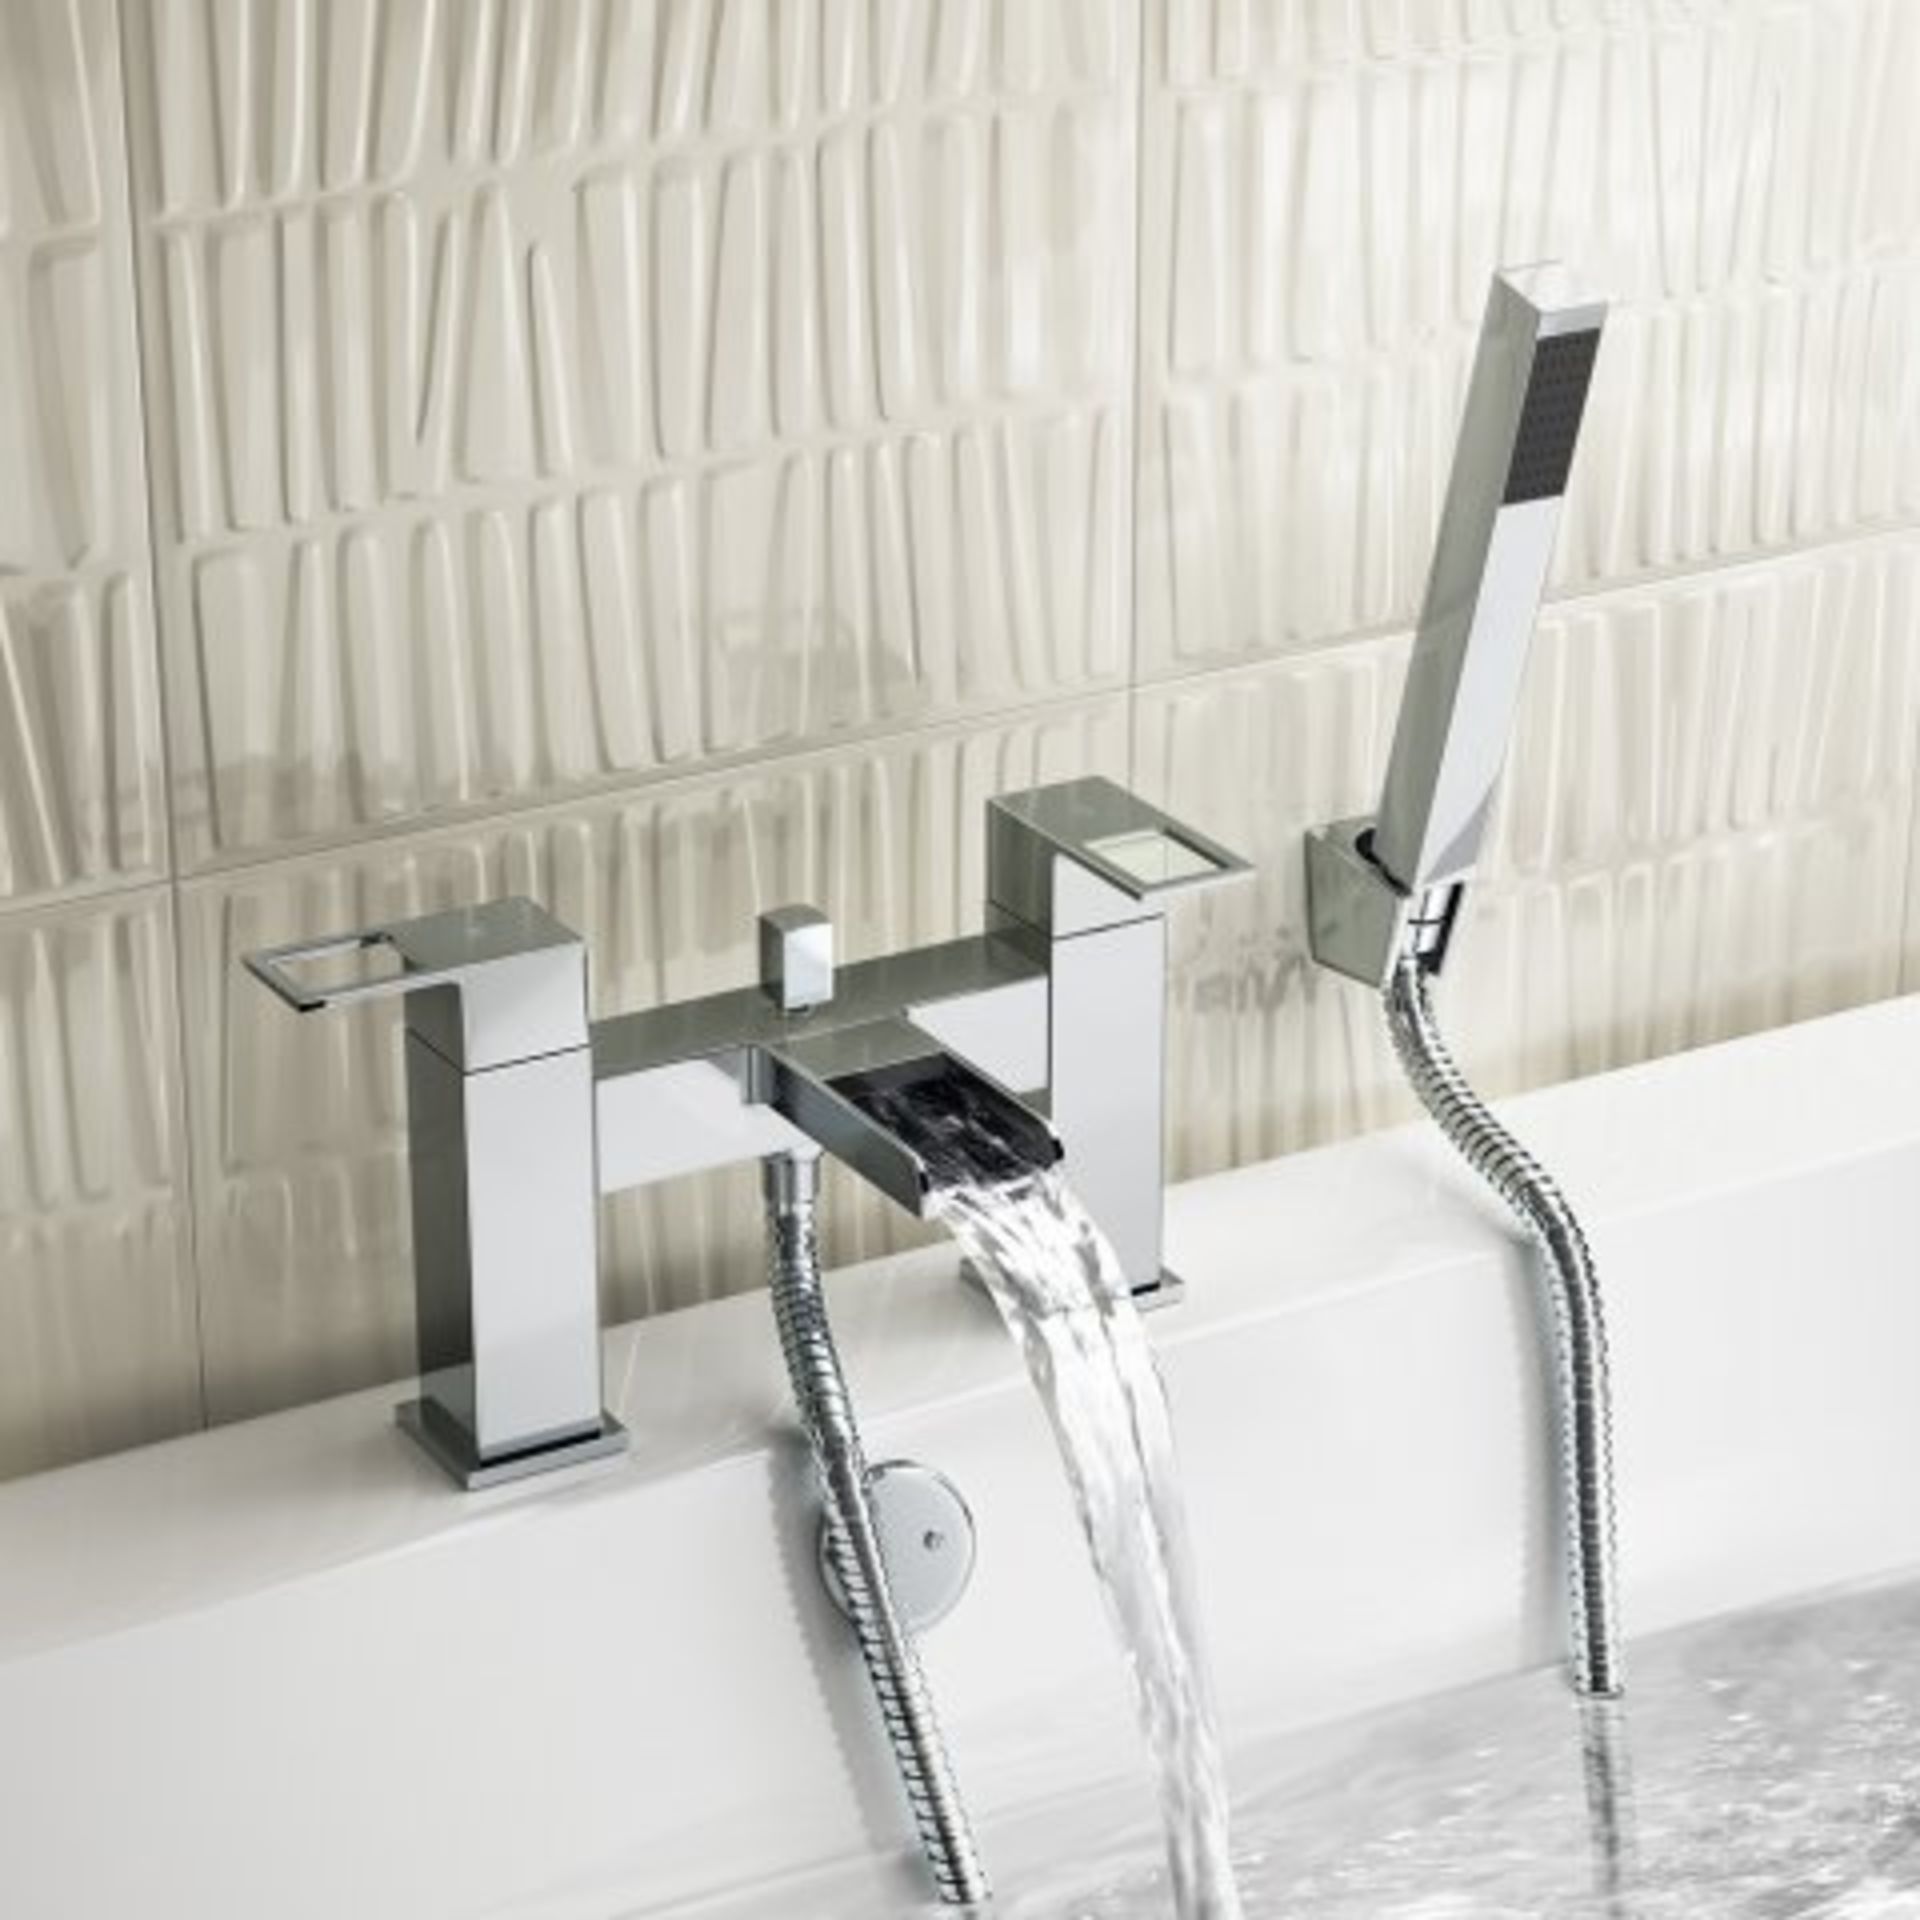 (K163) Everest II Waterfall Bath Mixer Tap with Hand Held Shower. RRP £199.99. Presenting a - Image 3 of 3